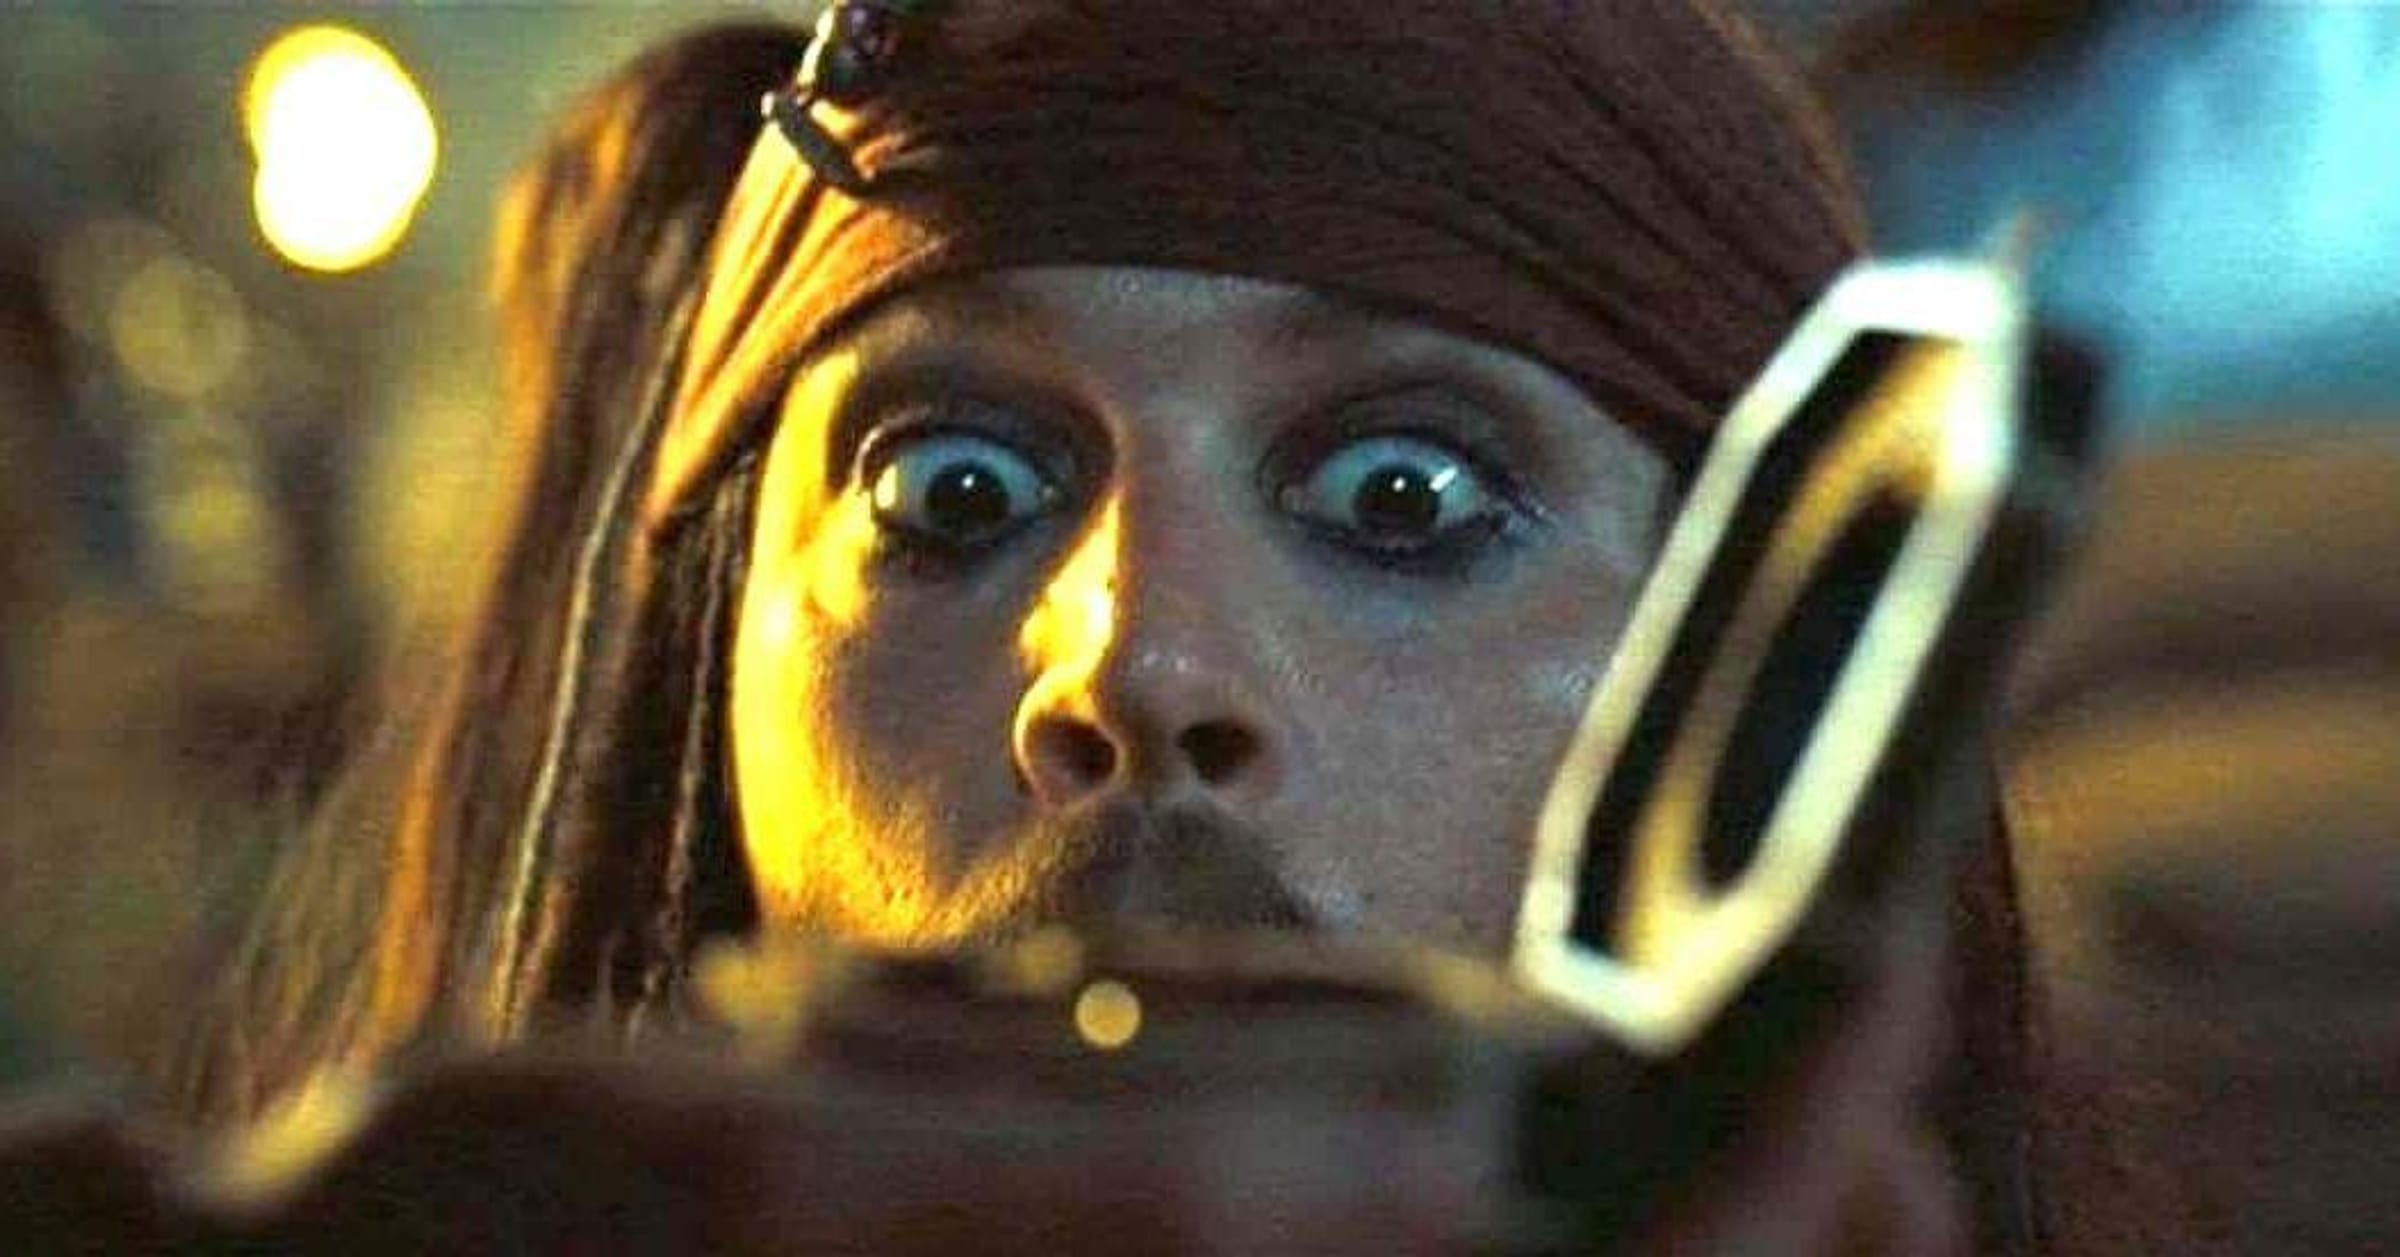 The scene from Pirates of the Caribbean that will make you see